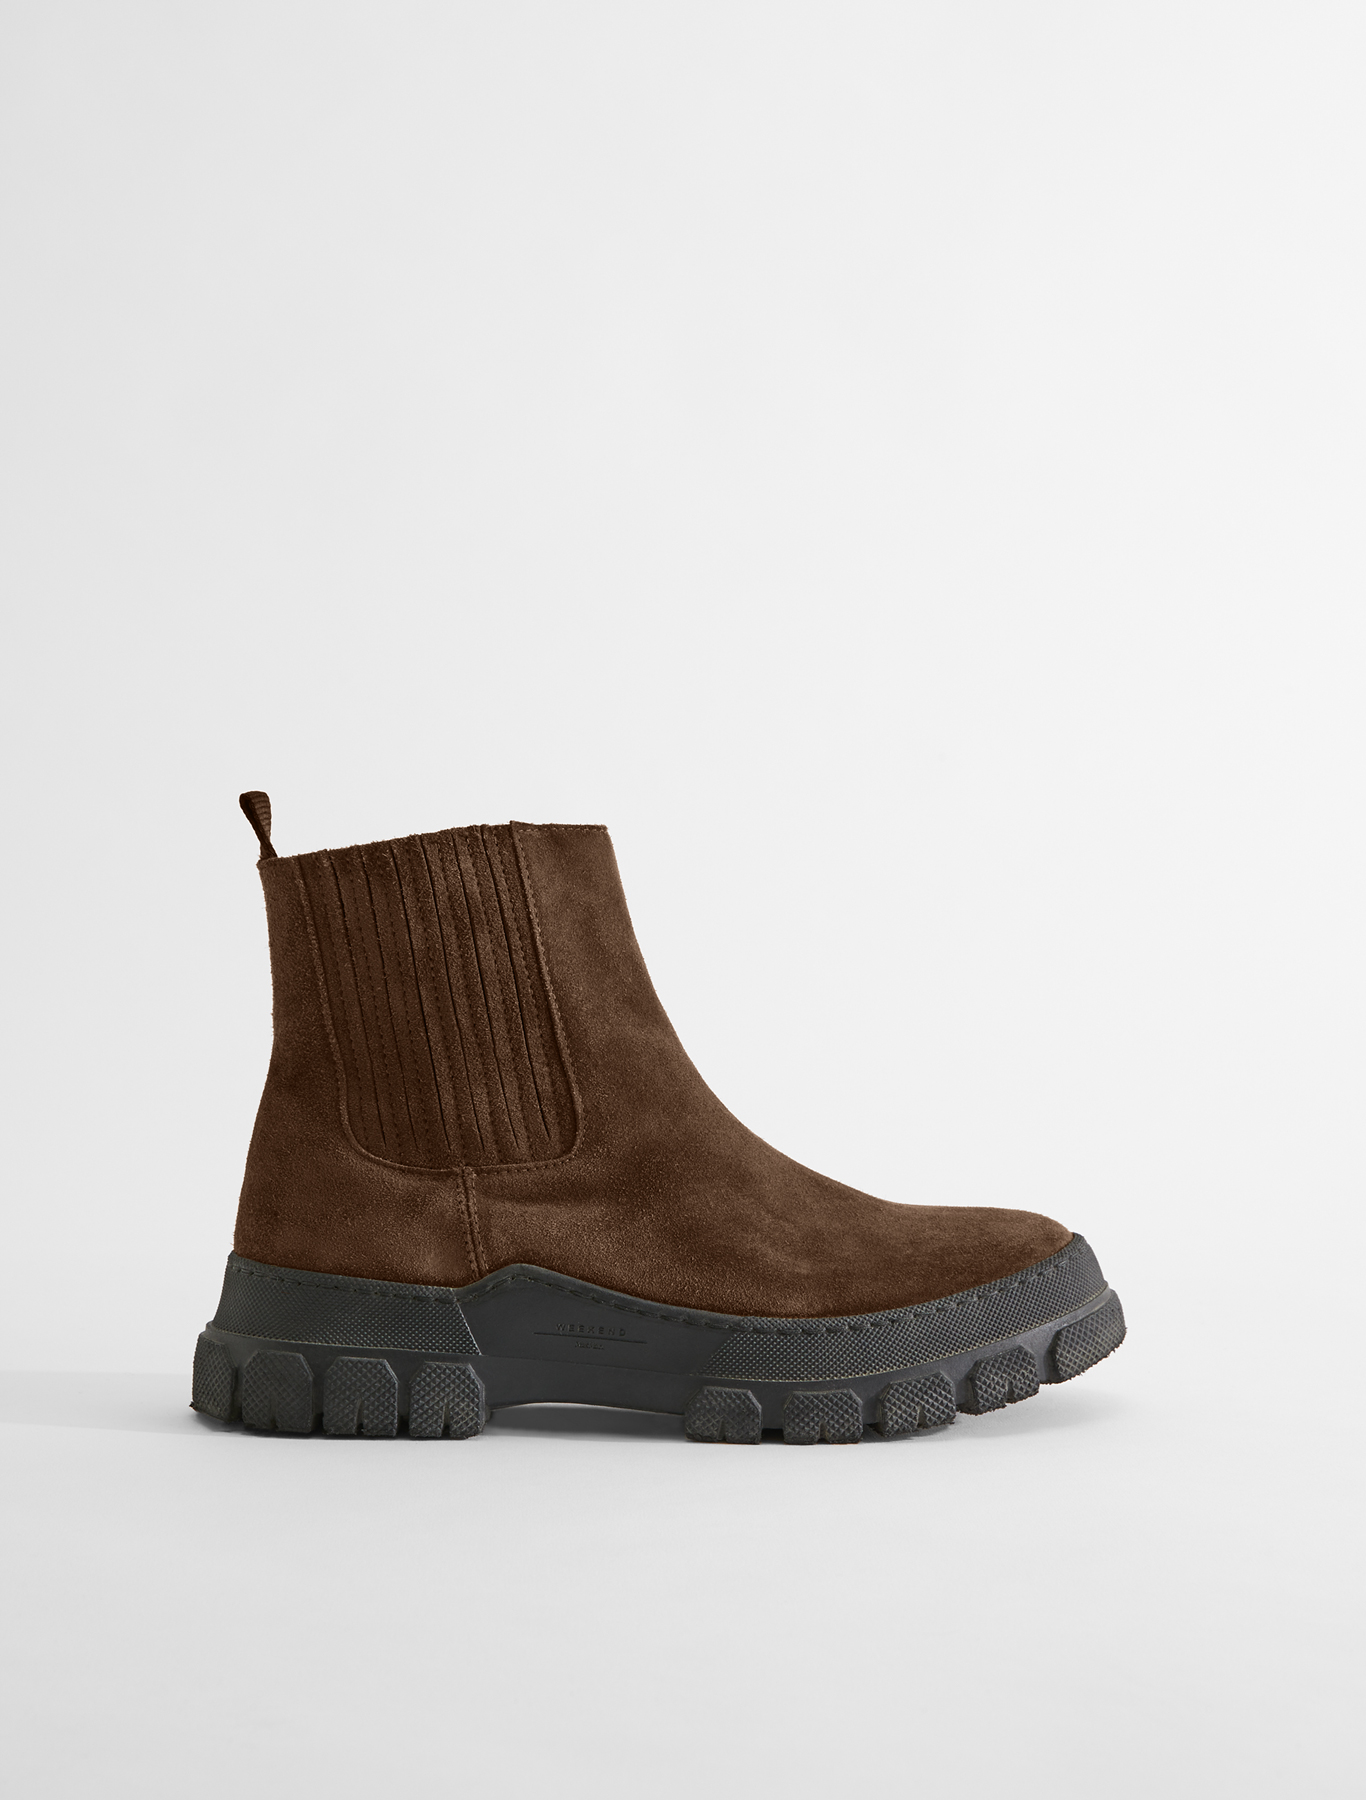 Suede leather ankle boots, dark brown 